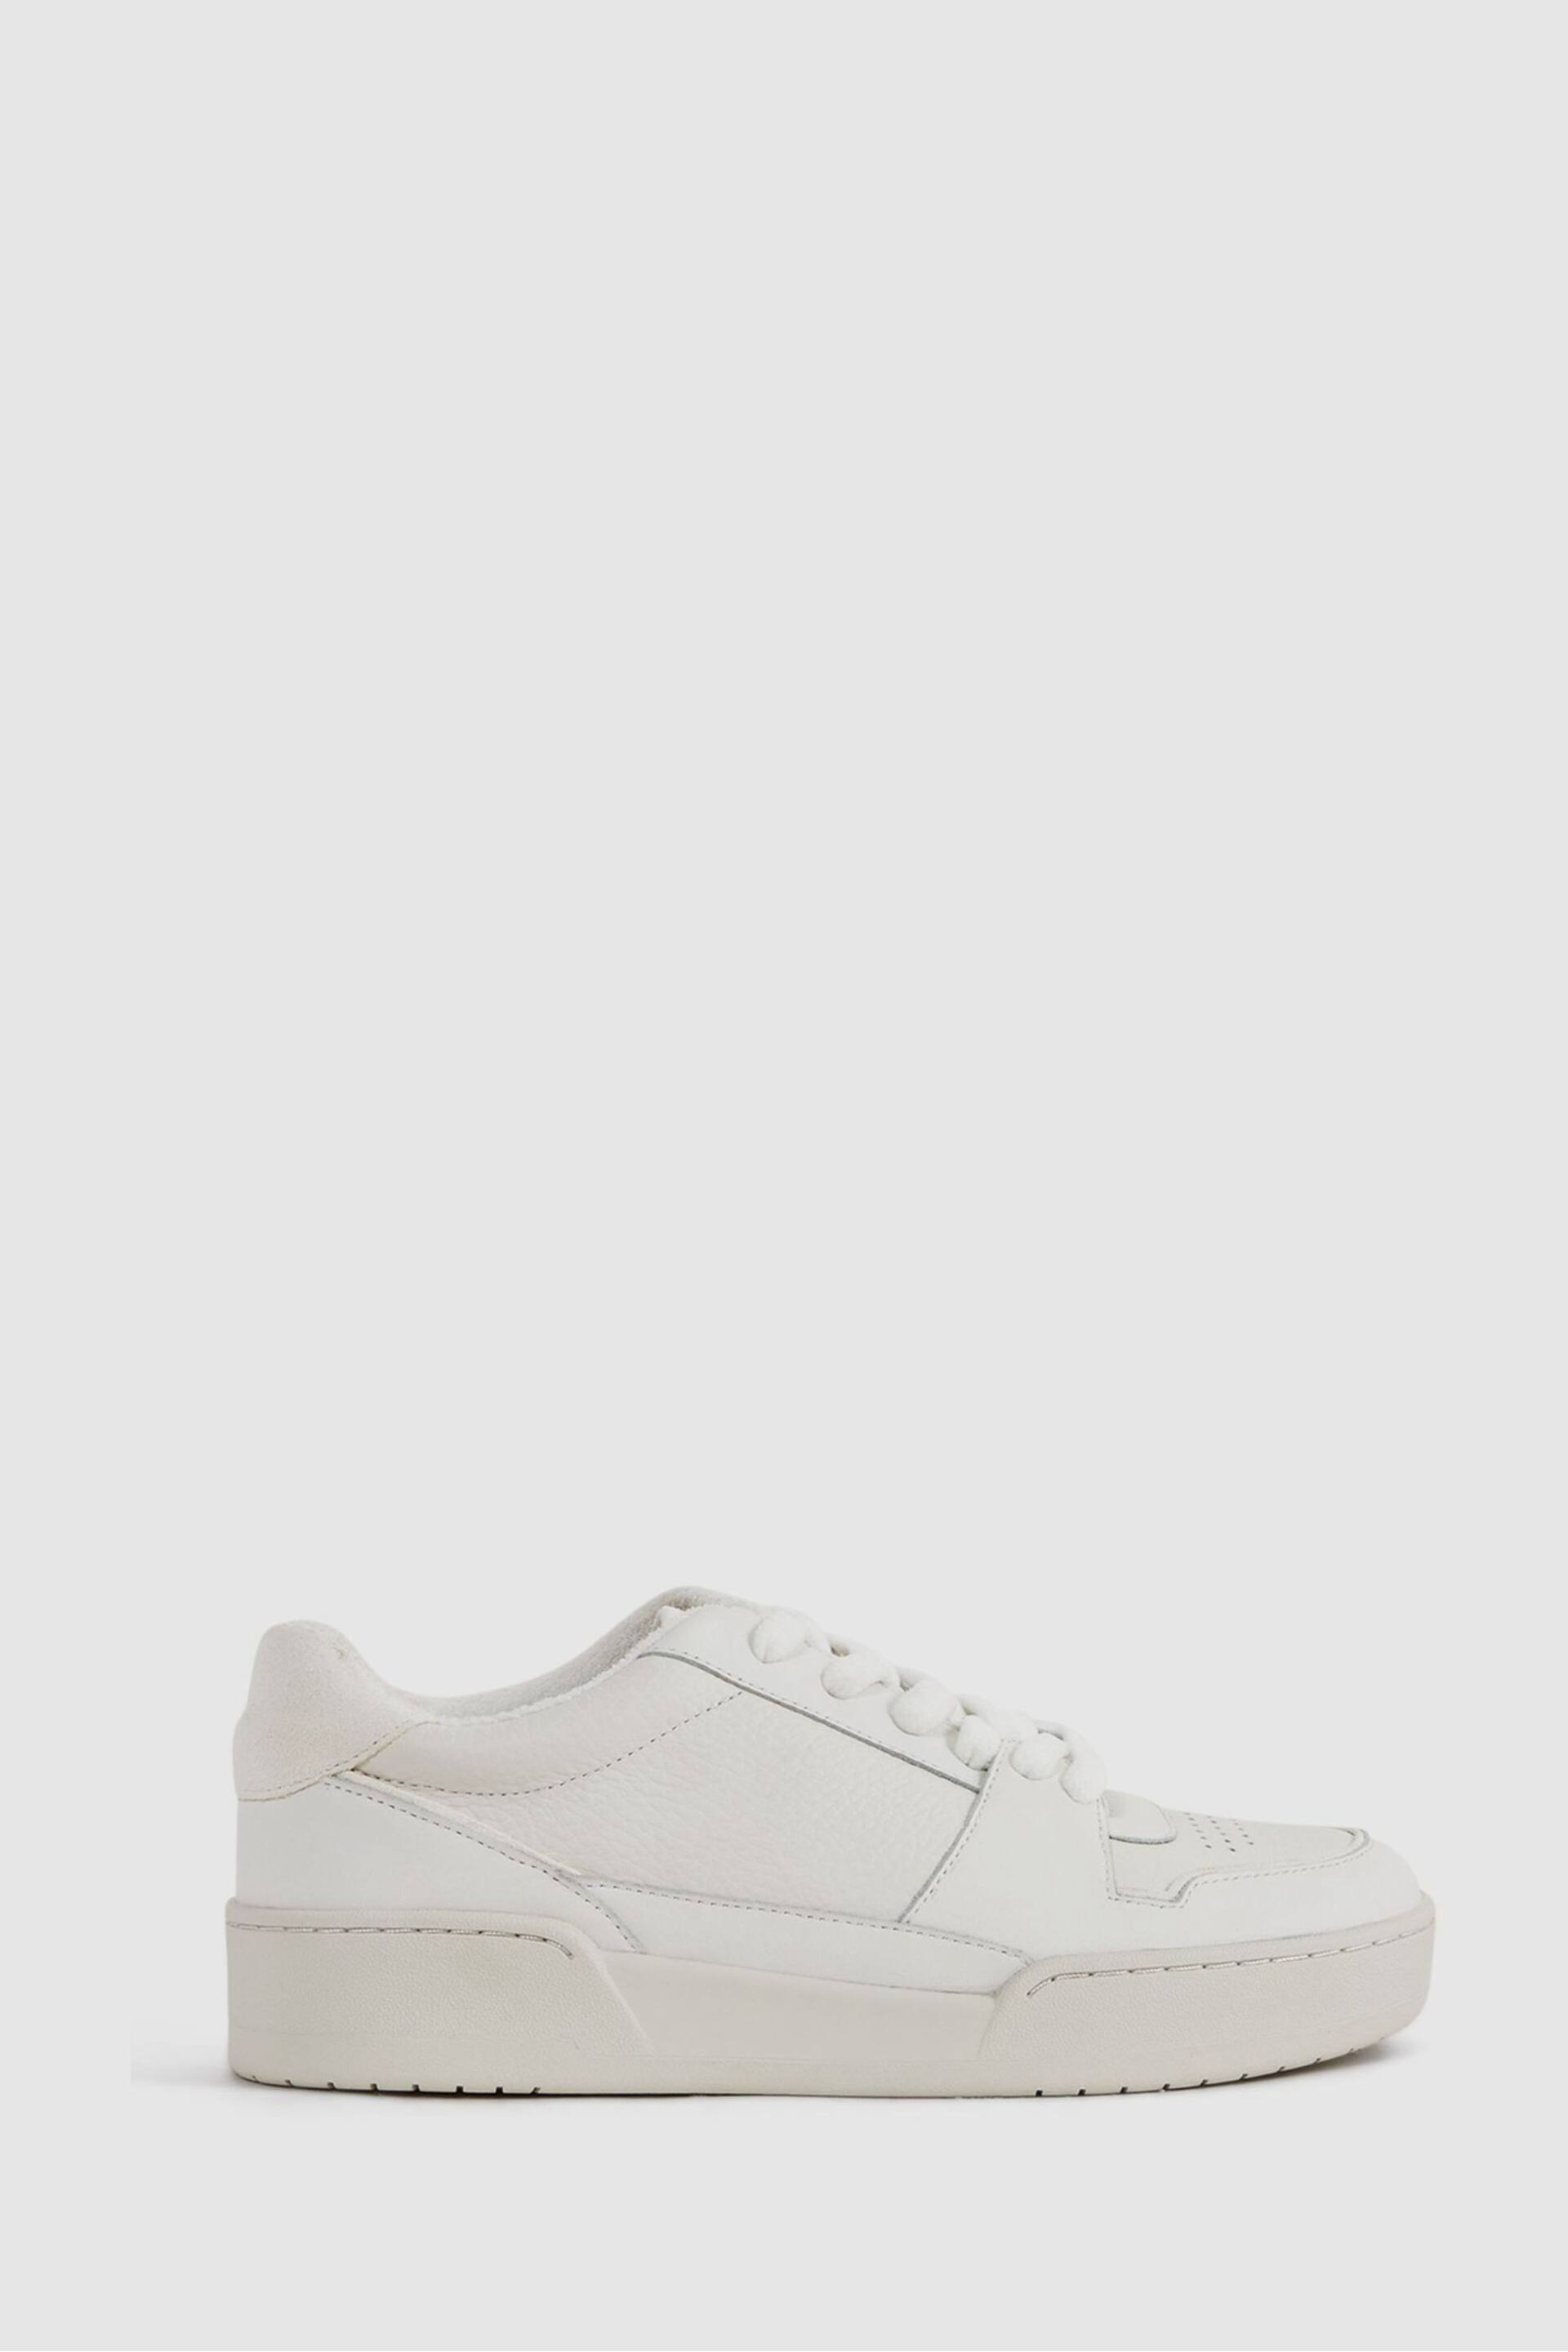 Reiss White Frankie Leather Lace-Up Trainers - Image 1 of 6